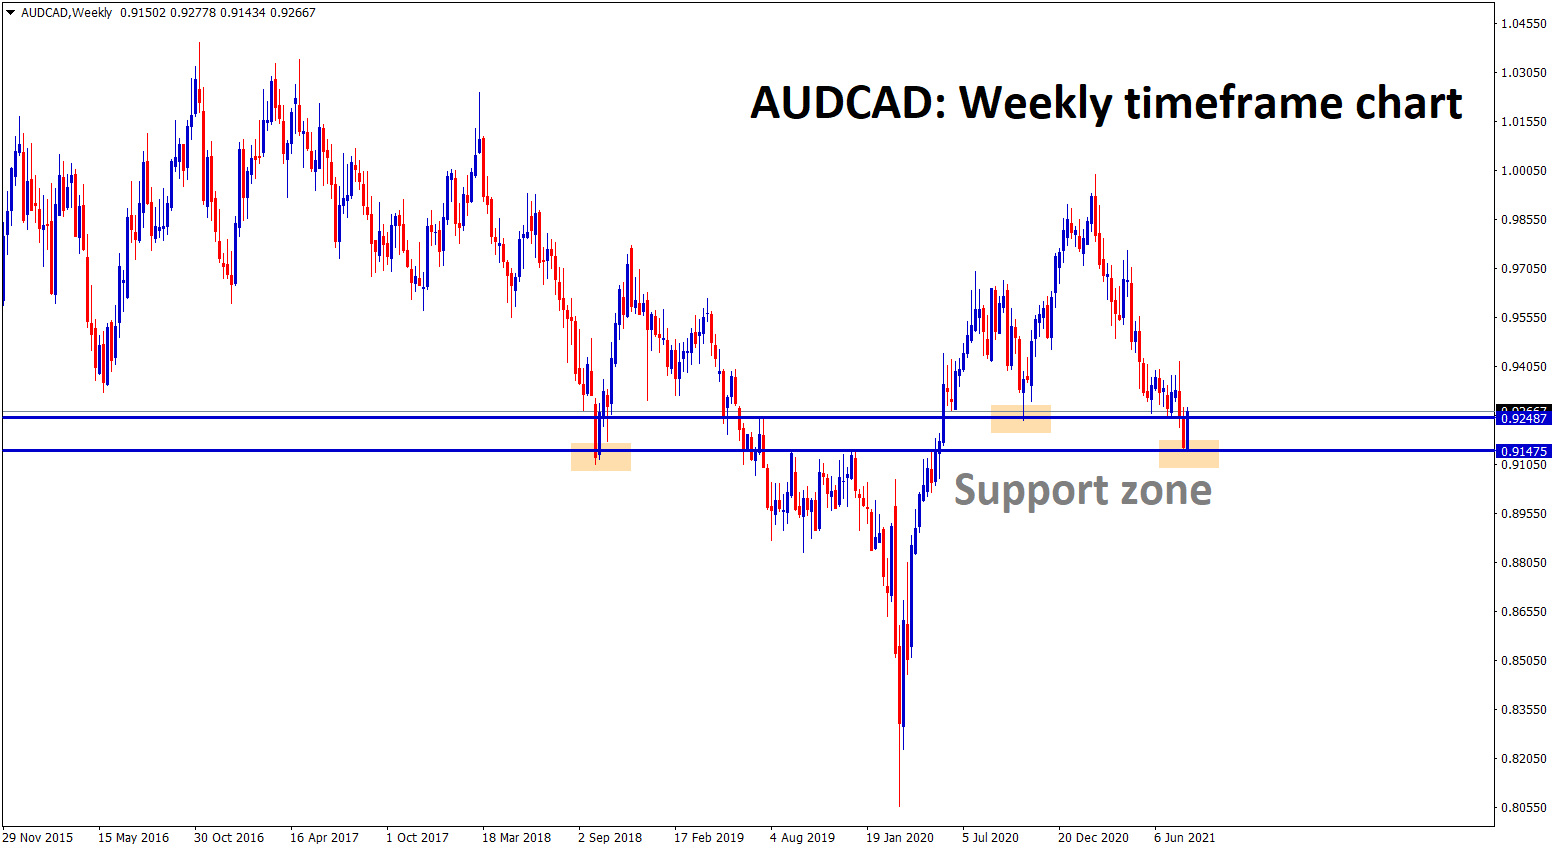 AUDCAD is bouncing back from the strong support zone fake breakout occurs comparing with recent support